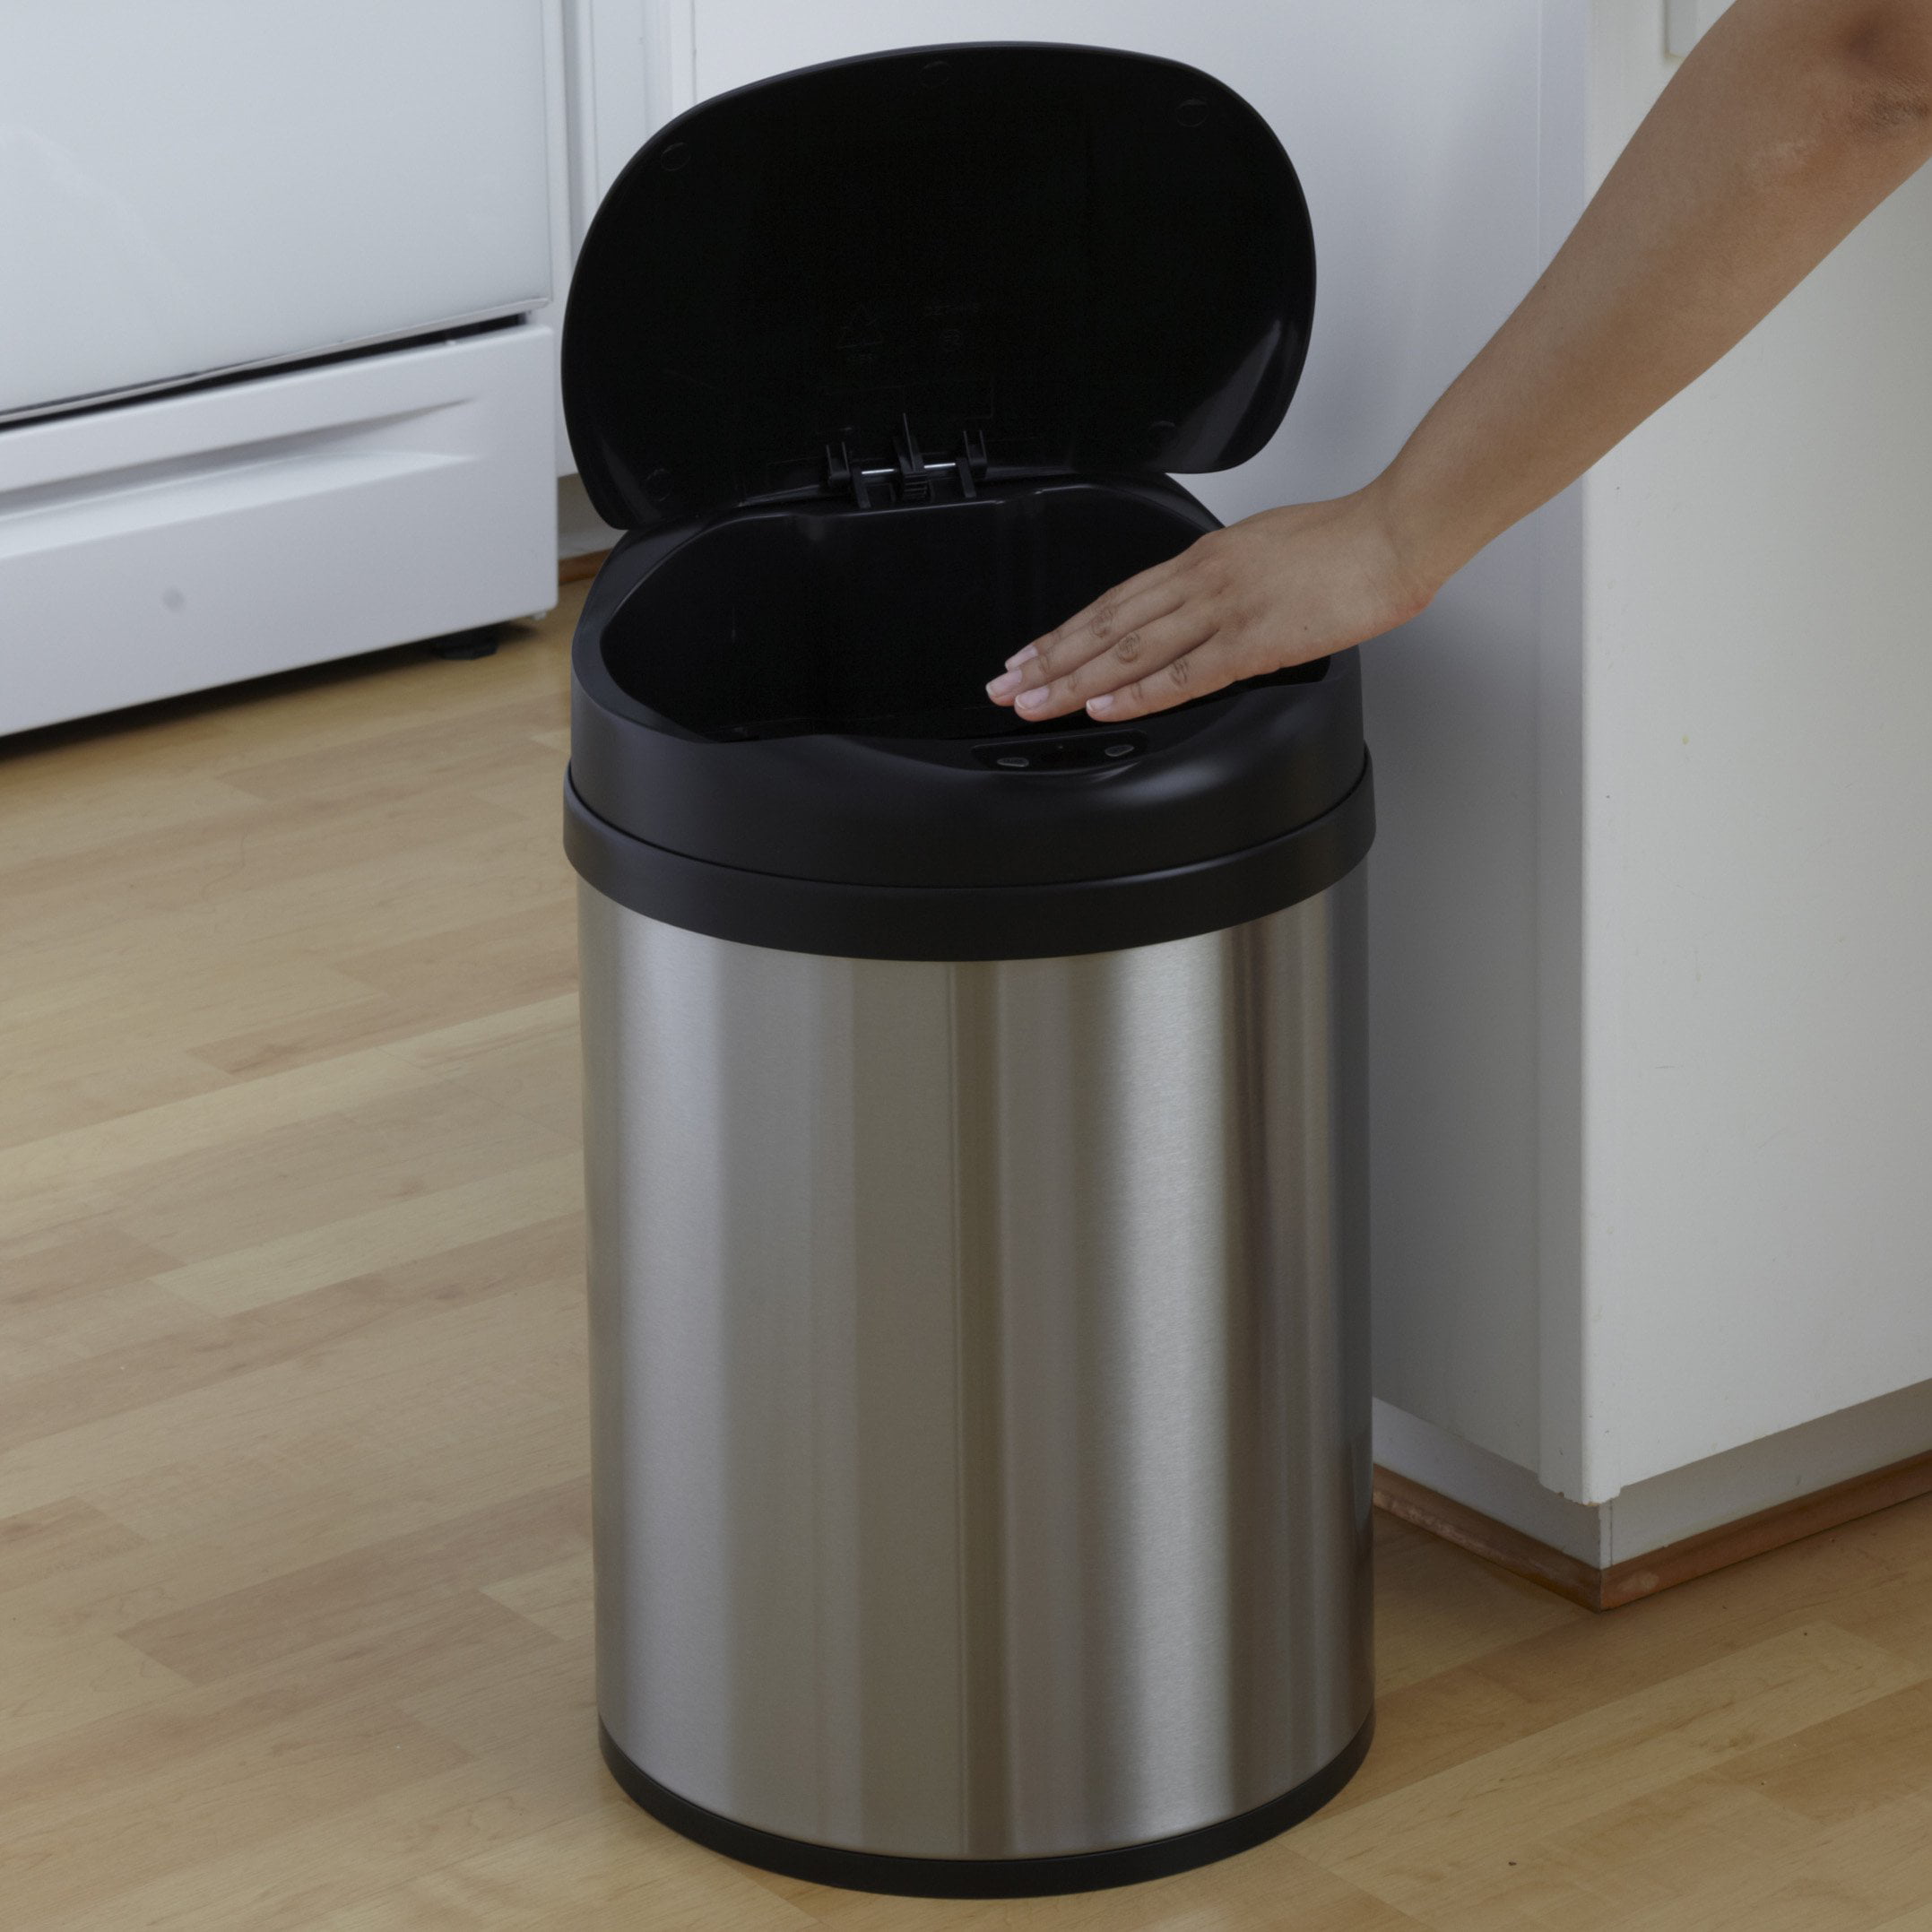 Nine Stars DZT-31-8 Touchless Stainless Steel 8.2 Gallon Trash Can Garbage Cans Walmart Stainless Steel